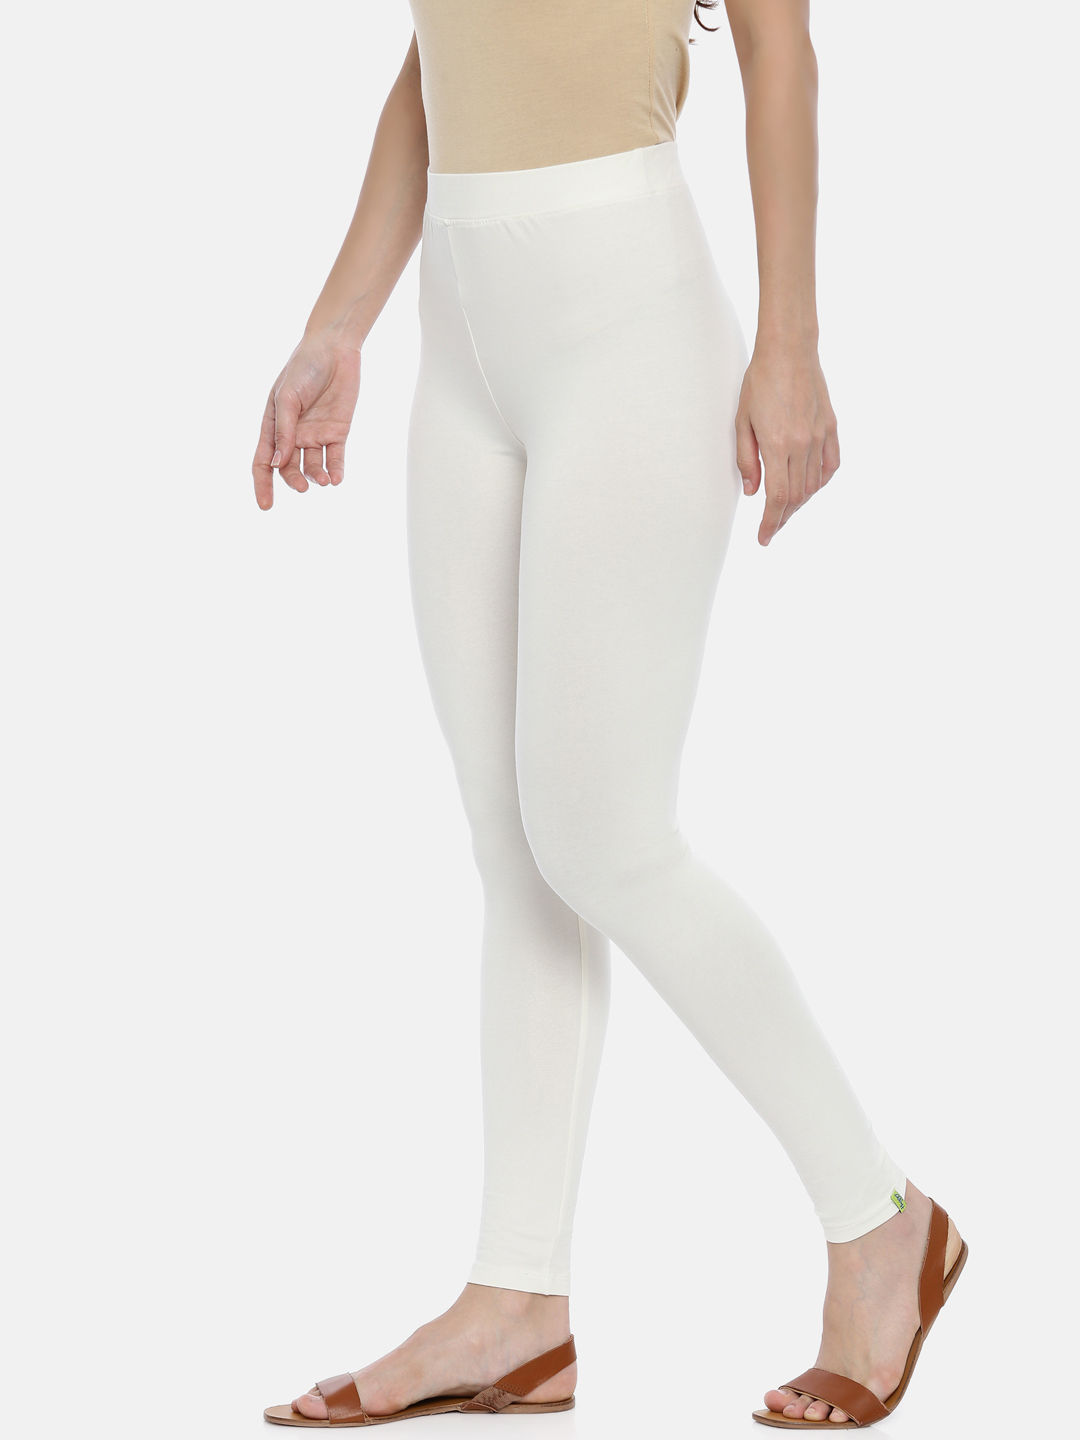 Lavania Cotton ankle length leggings, Size: Large and XXL at Rs 299 in  Haridwar